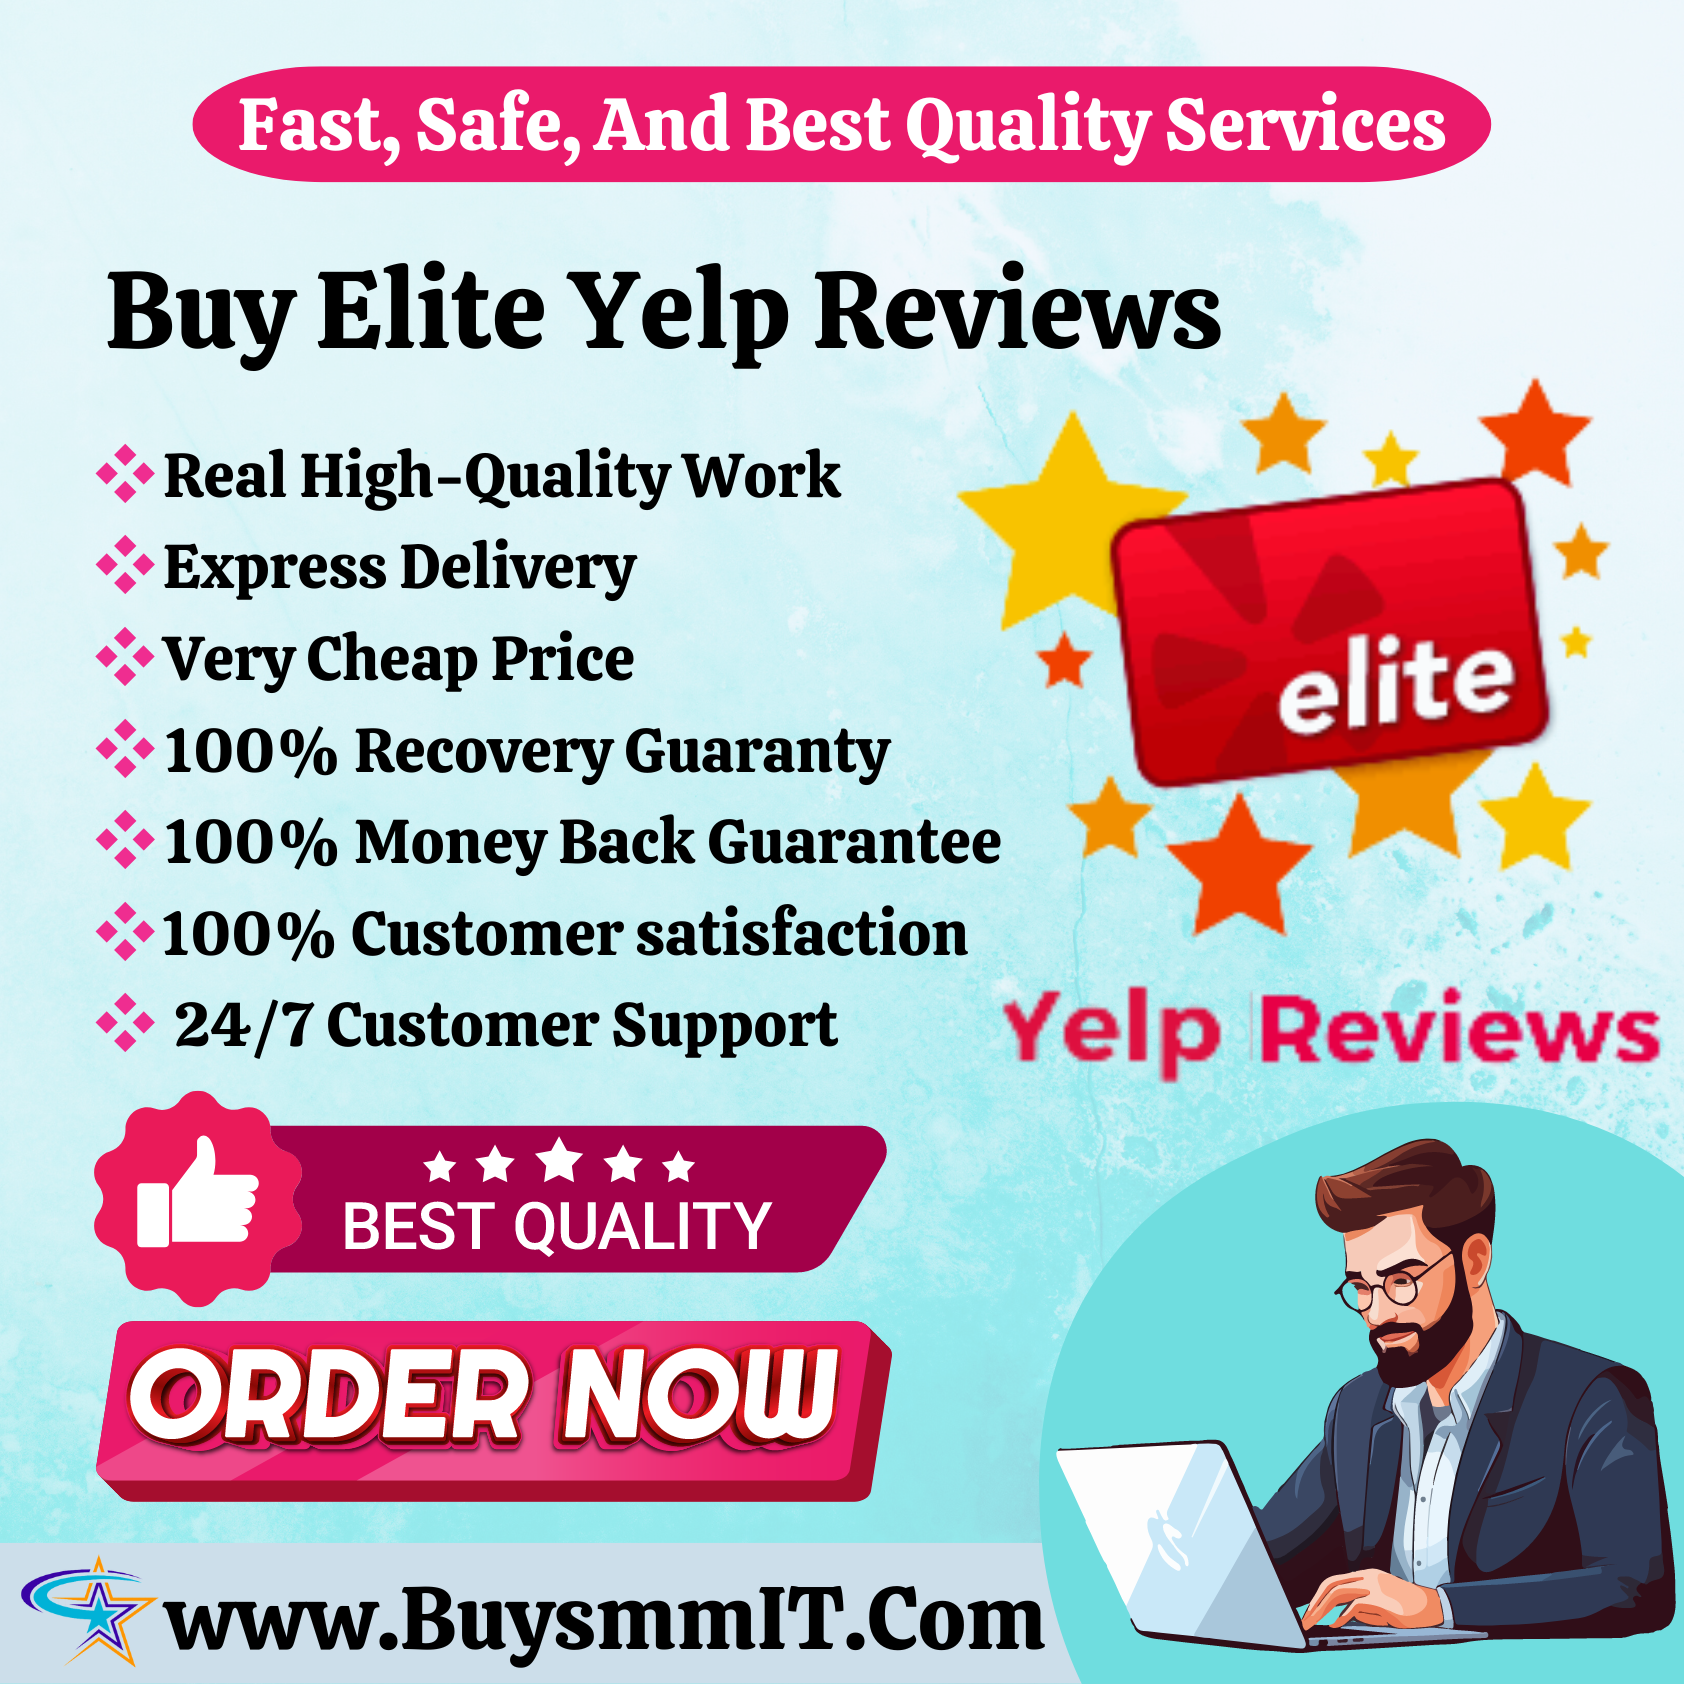 Buy Elite Yelp Reviews - With 100% Permanent Reviews